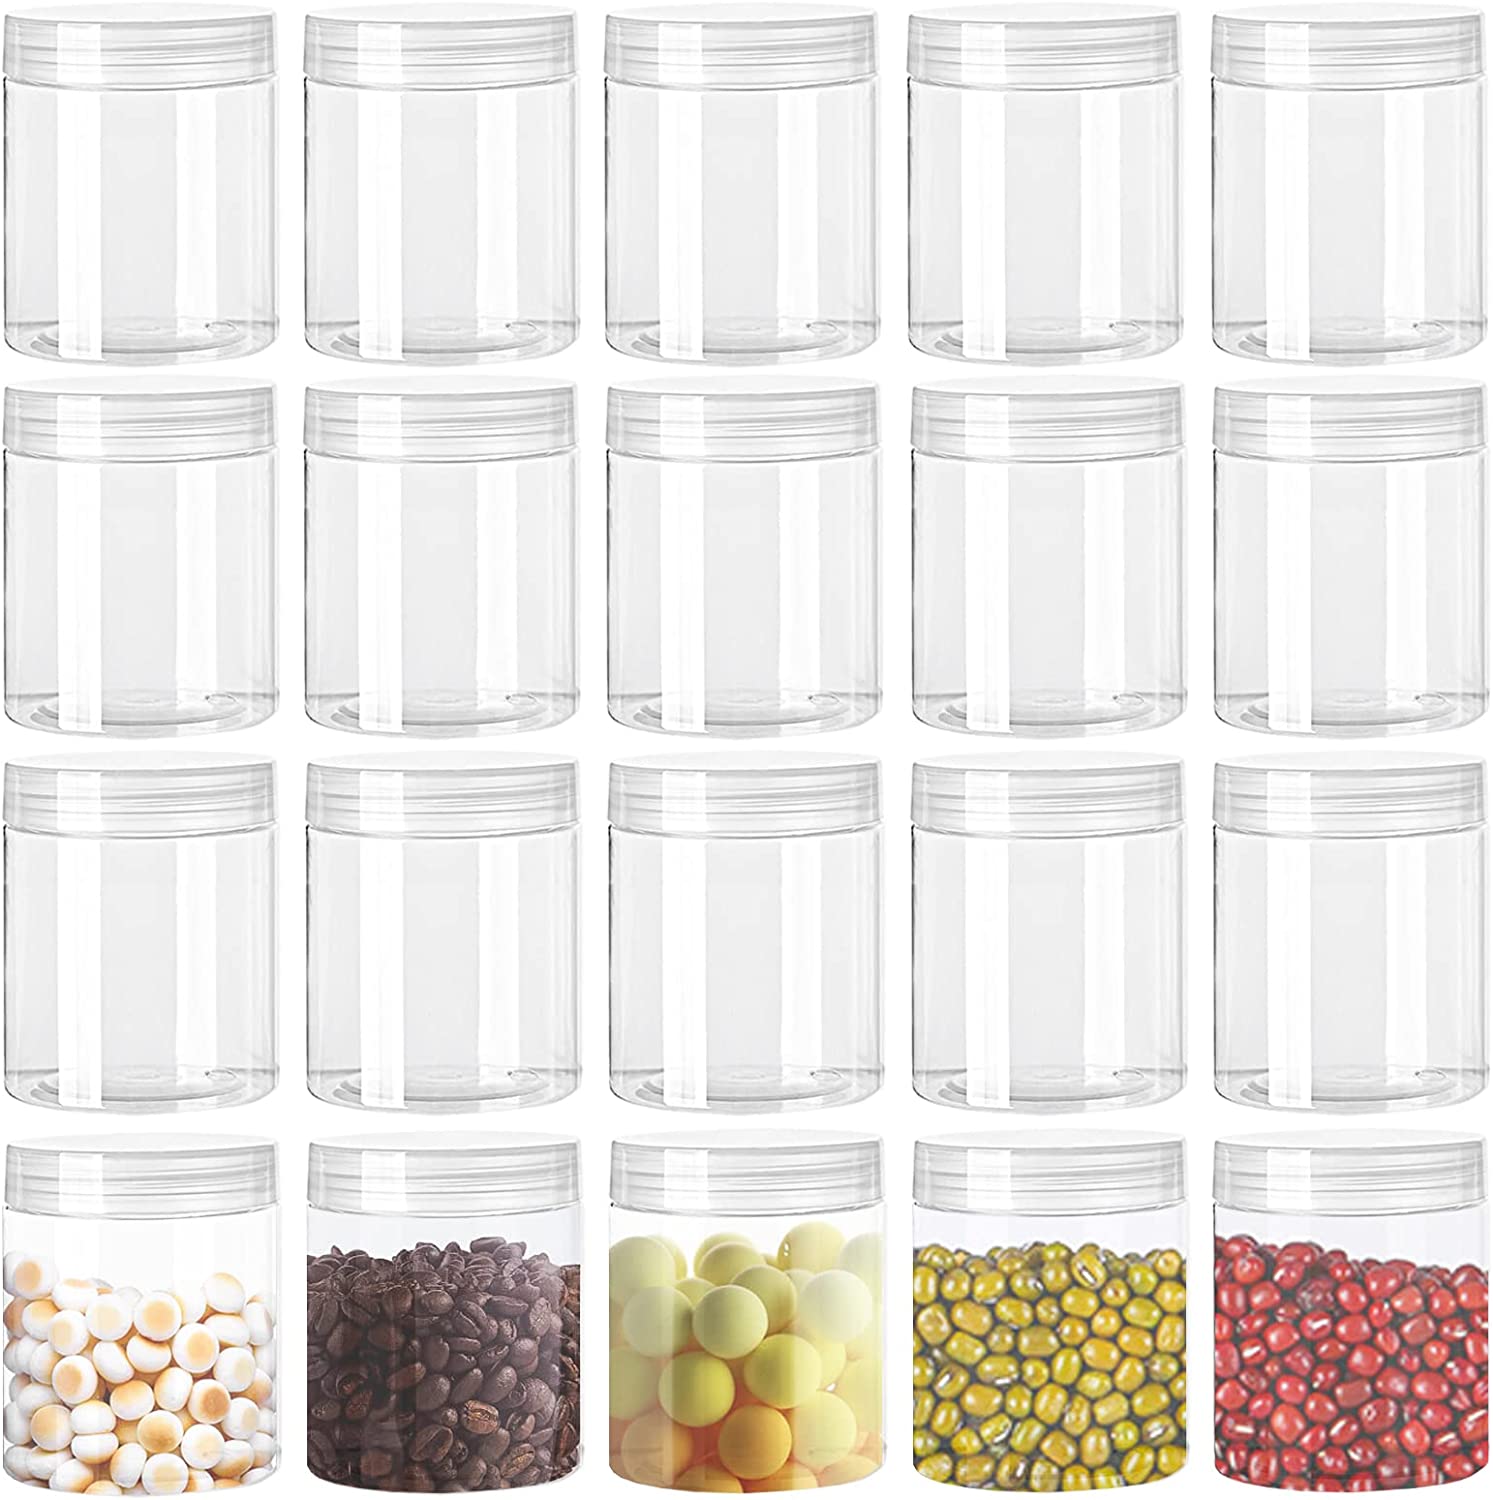 Augshy 40 Pack 4oz Big Size Clear Slime Foam Ball Big Storage Containers with Lids